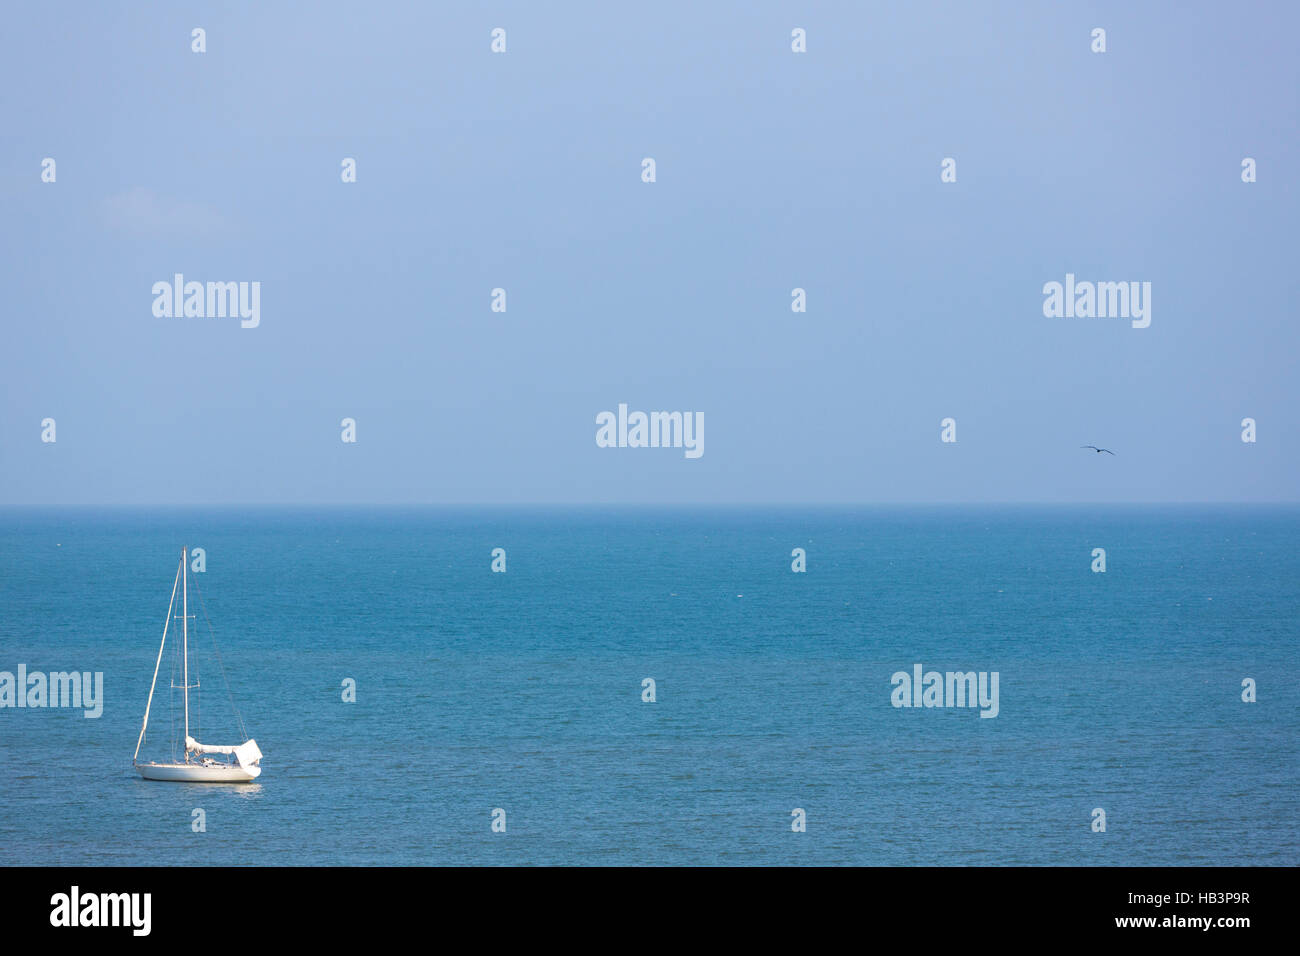 Sailboat with no sail sailing on flat blue water in Venezuela Stock Photo